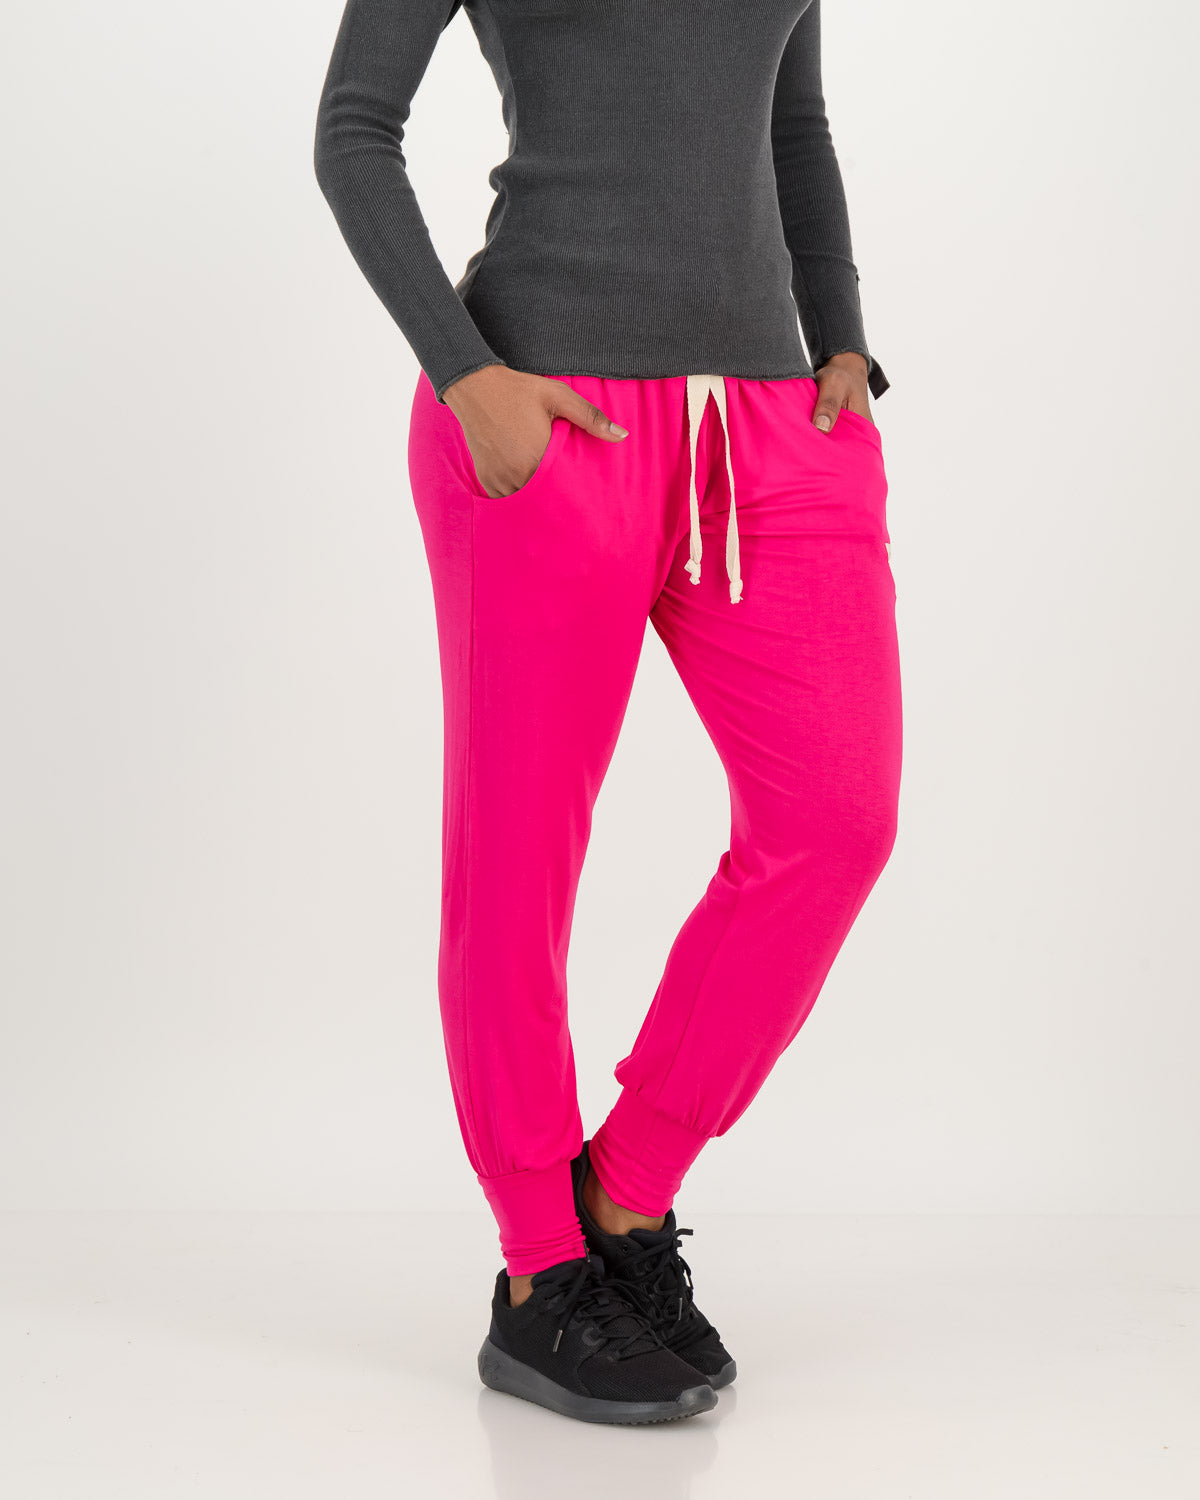 Jogger pants, magenta pants, Jogger pants, brown, Comfy jogger pants, charcoal pants, we love these Comfy Pants as much as you do! The comfiest pants in the world that totally live up to their name! Natural and breathable viscose lycra, that feels soft against your skin, with a very flattering draping effect, yoga pants, casual wear, active wear, wear it walking, travel pants, loungewear, it is good for you, it's good for the earth, Eco Threads Clothing, made in South Africa